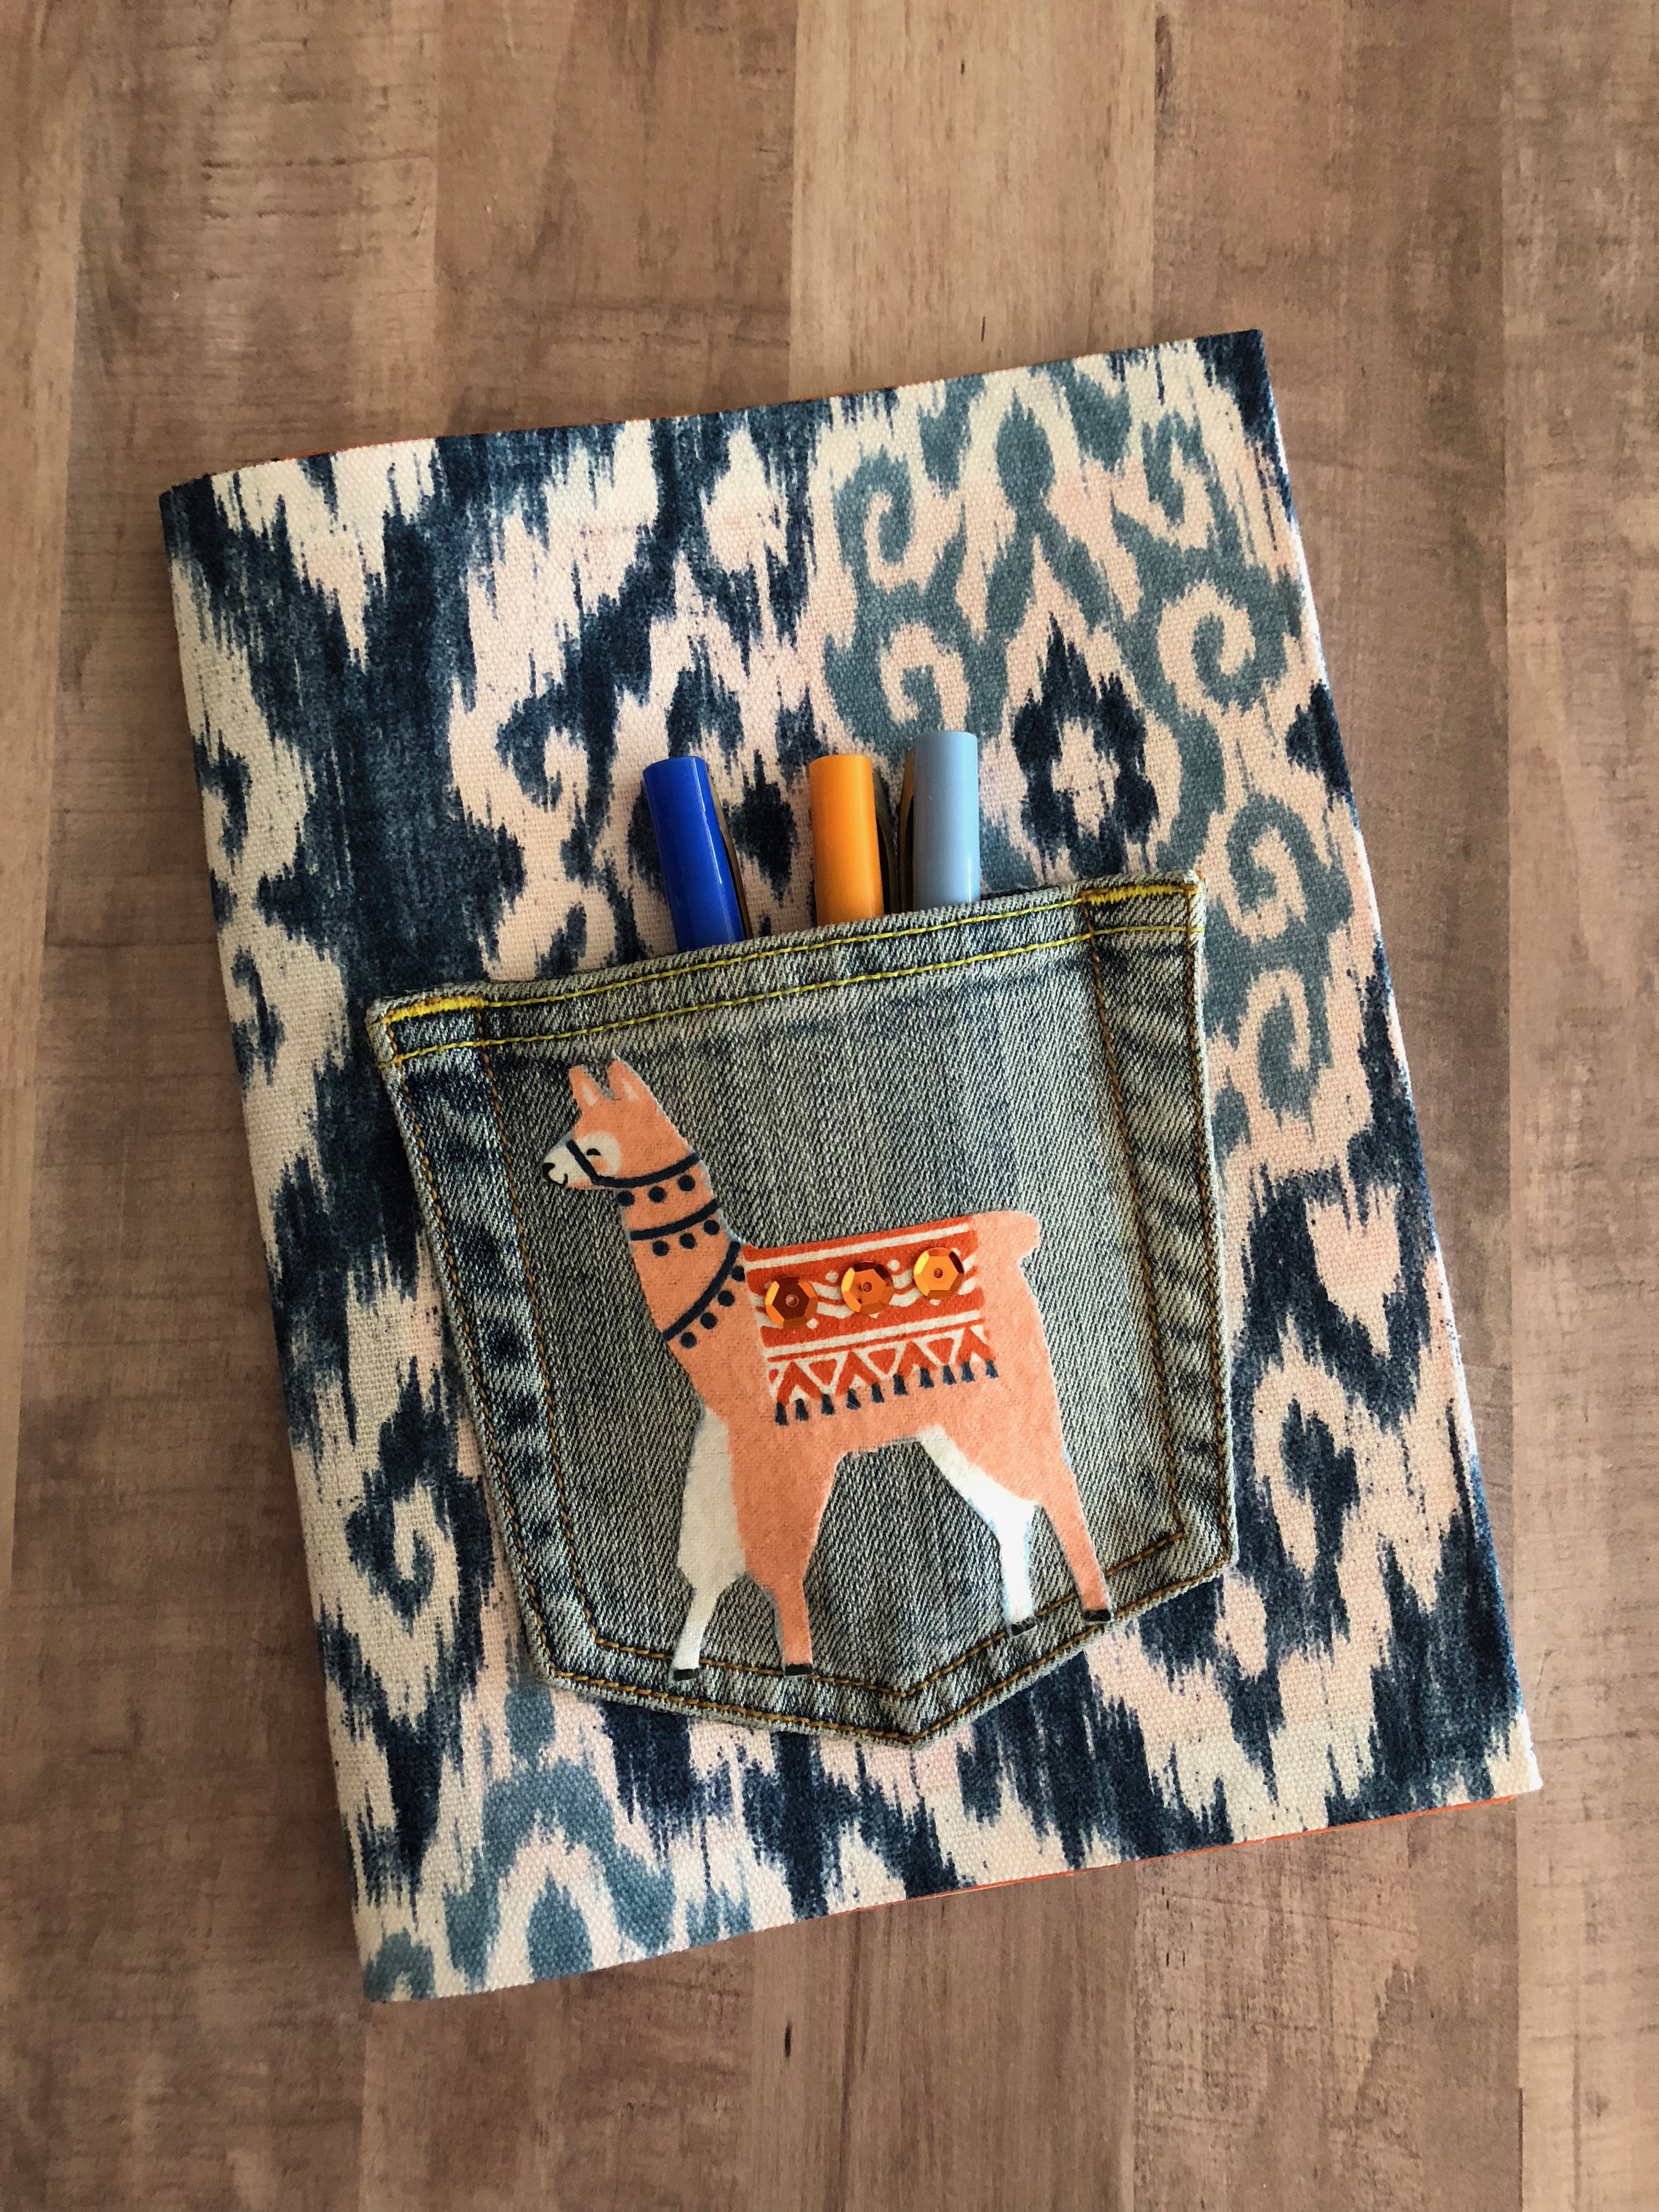 12+ Fabric Mod Podge Projects for Back to School Fashion and Dorm Decor -  CATHIE FILIAN's Handmade Happy Hour